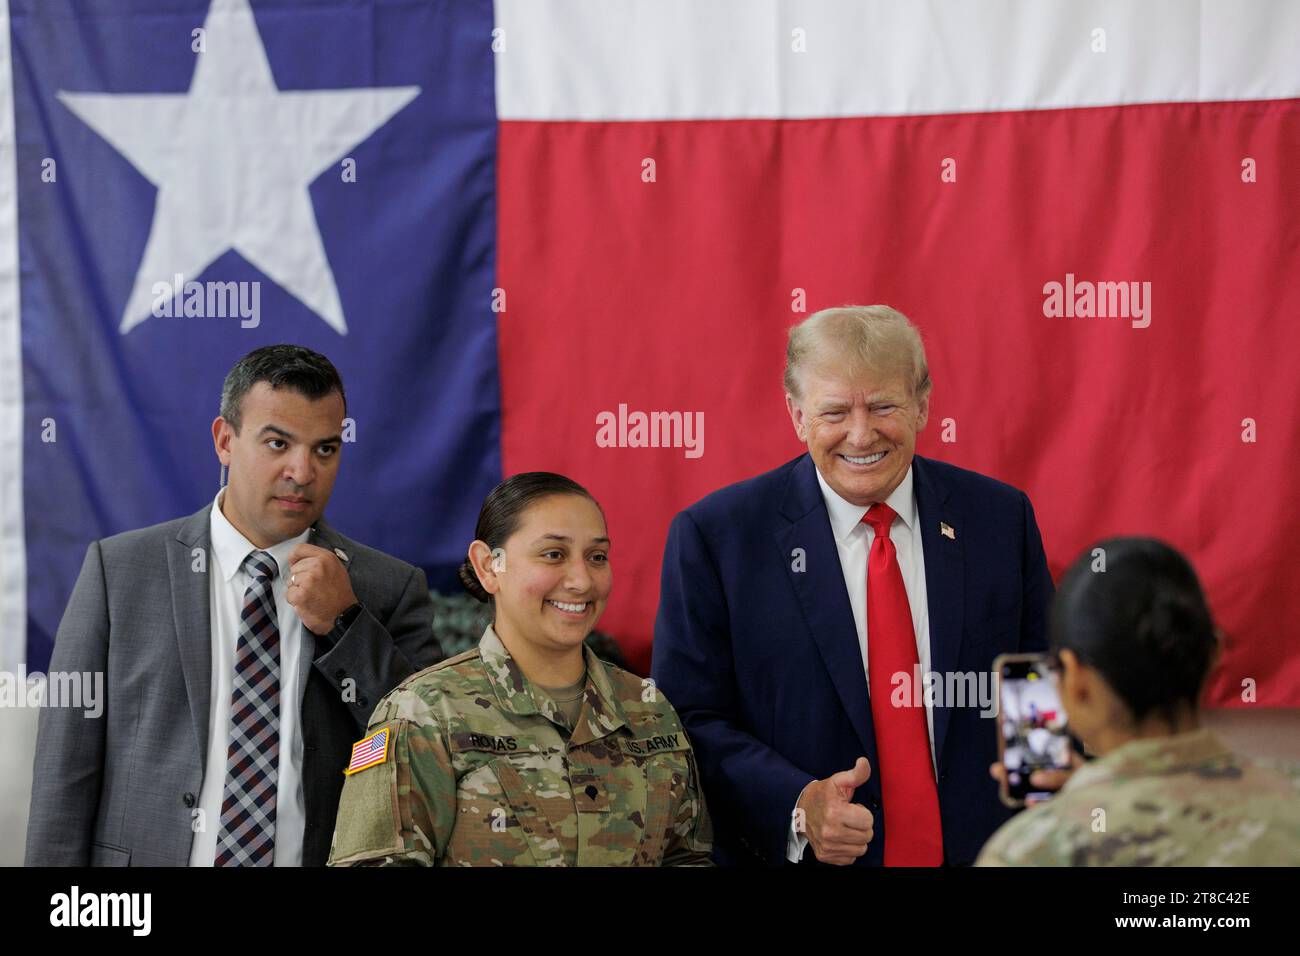 Edinburg, Texas USA, November 19 2023: Former President DONALD TRUMP, a candidate for the Republican presidential nomination, poses for a photo with a young female member of the Texas National Guard at the South Texas International Airport. Trump flew in for a campaign rally at the airport. Photo by Michael Gonzalez/Pool Stock Photo